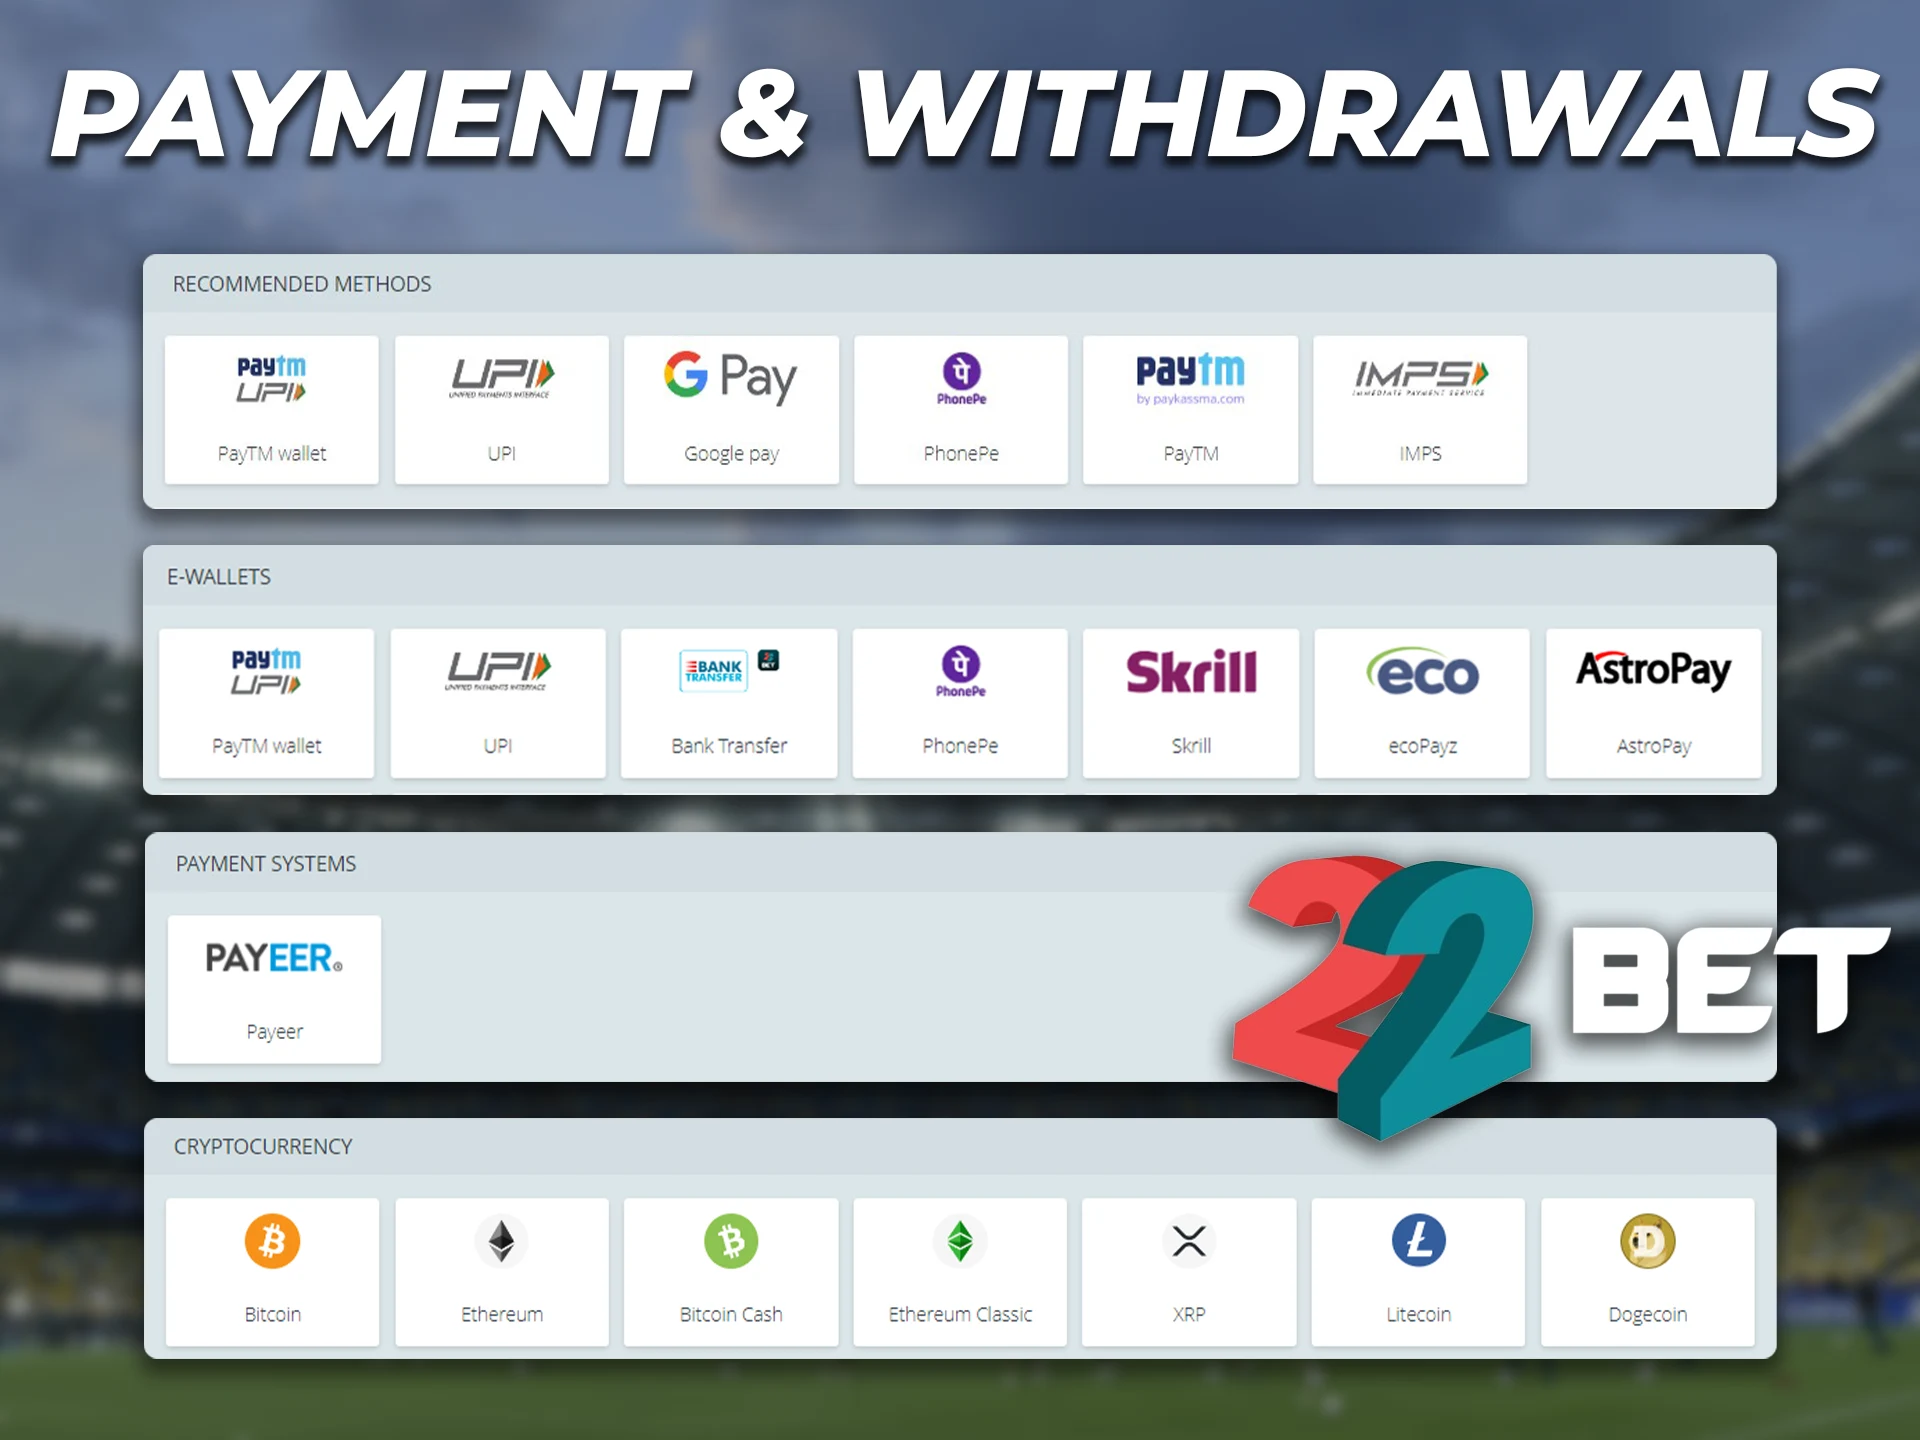 22Bet offers a wide range of payment and withdrawal options.